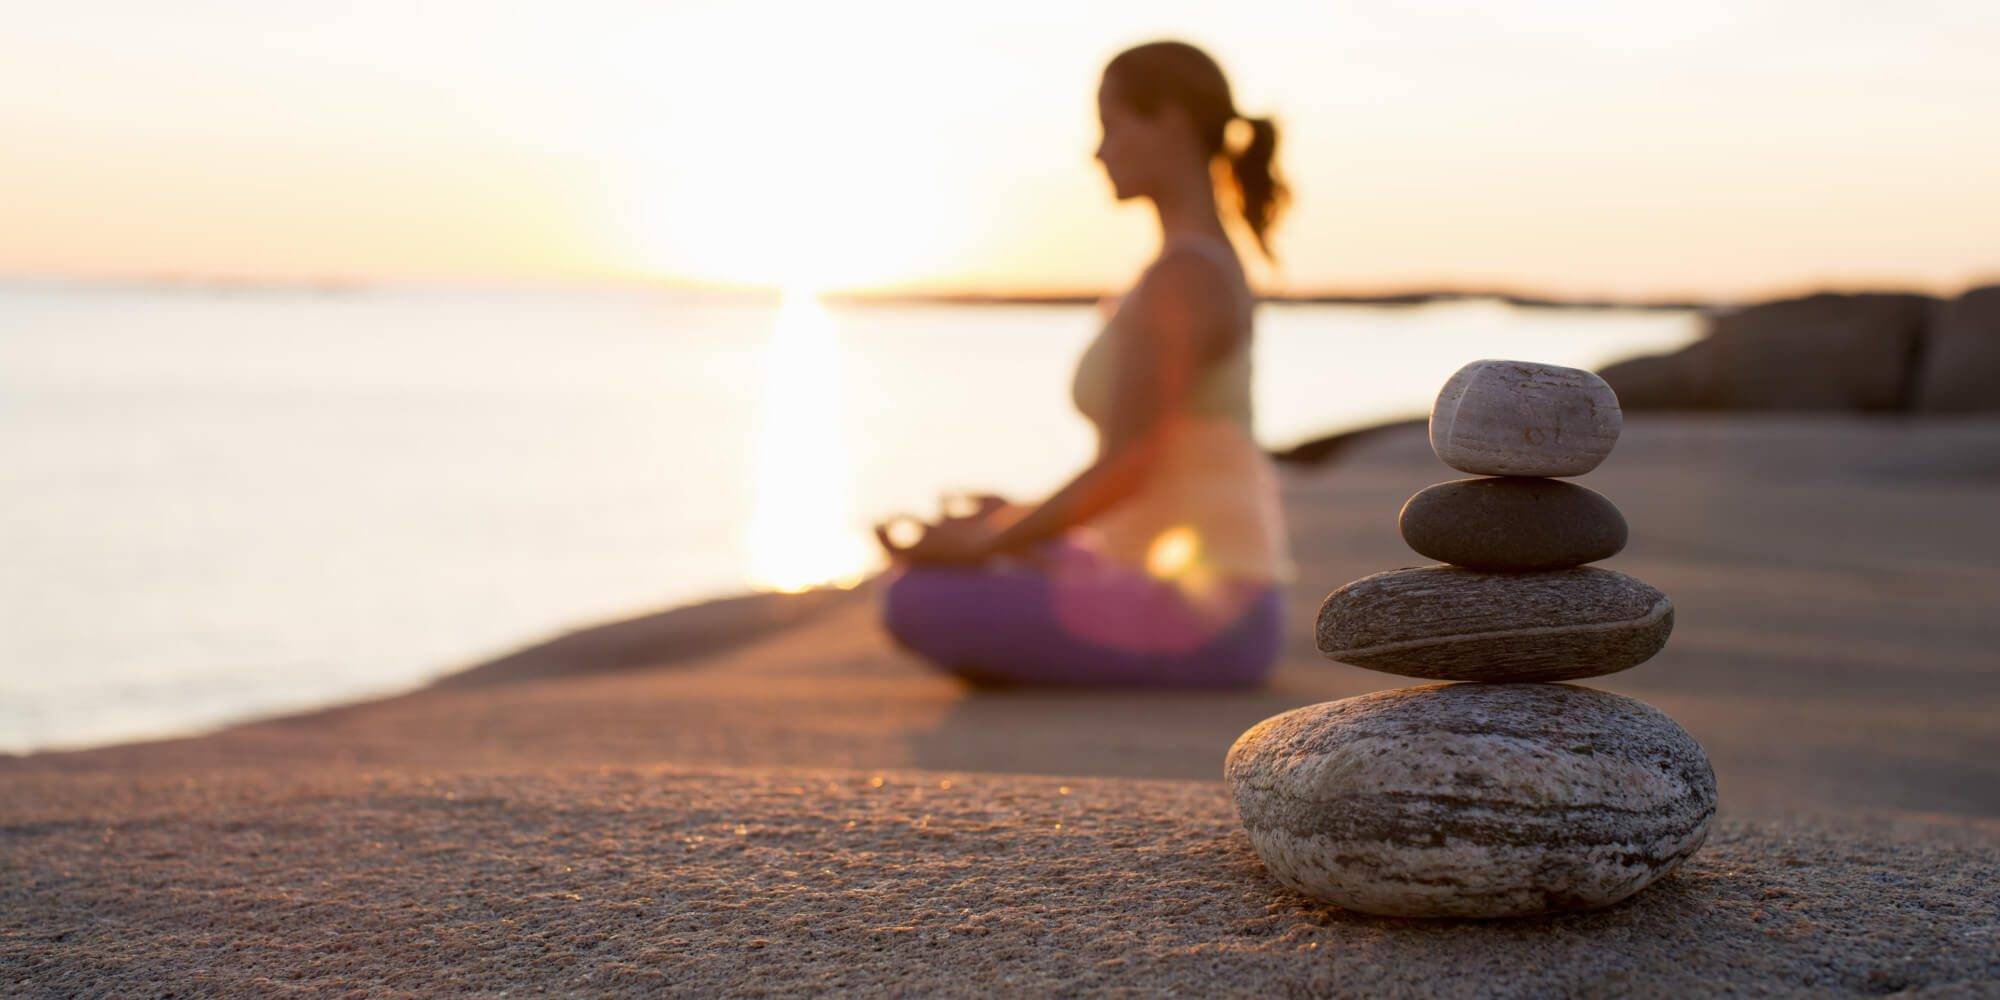 Know the healing power of meditation